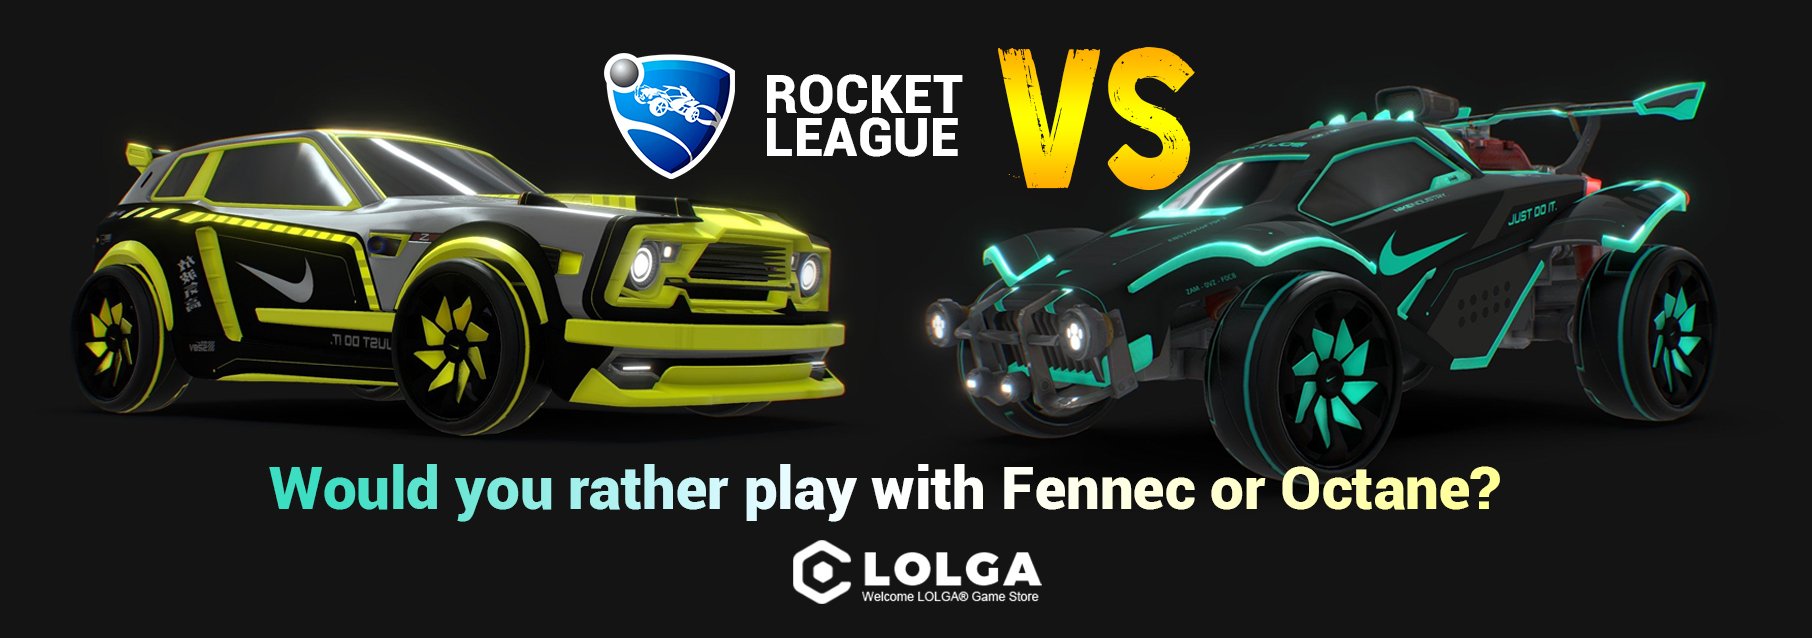  Would you rather play with Fennec or Octane? 